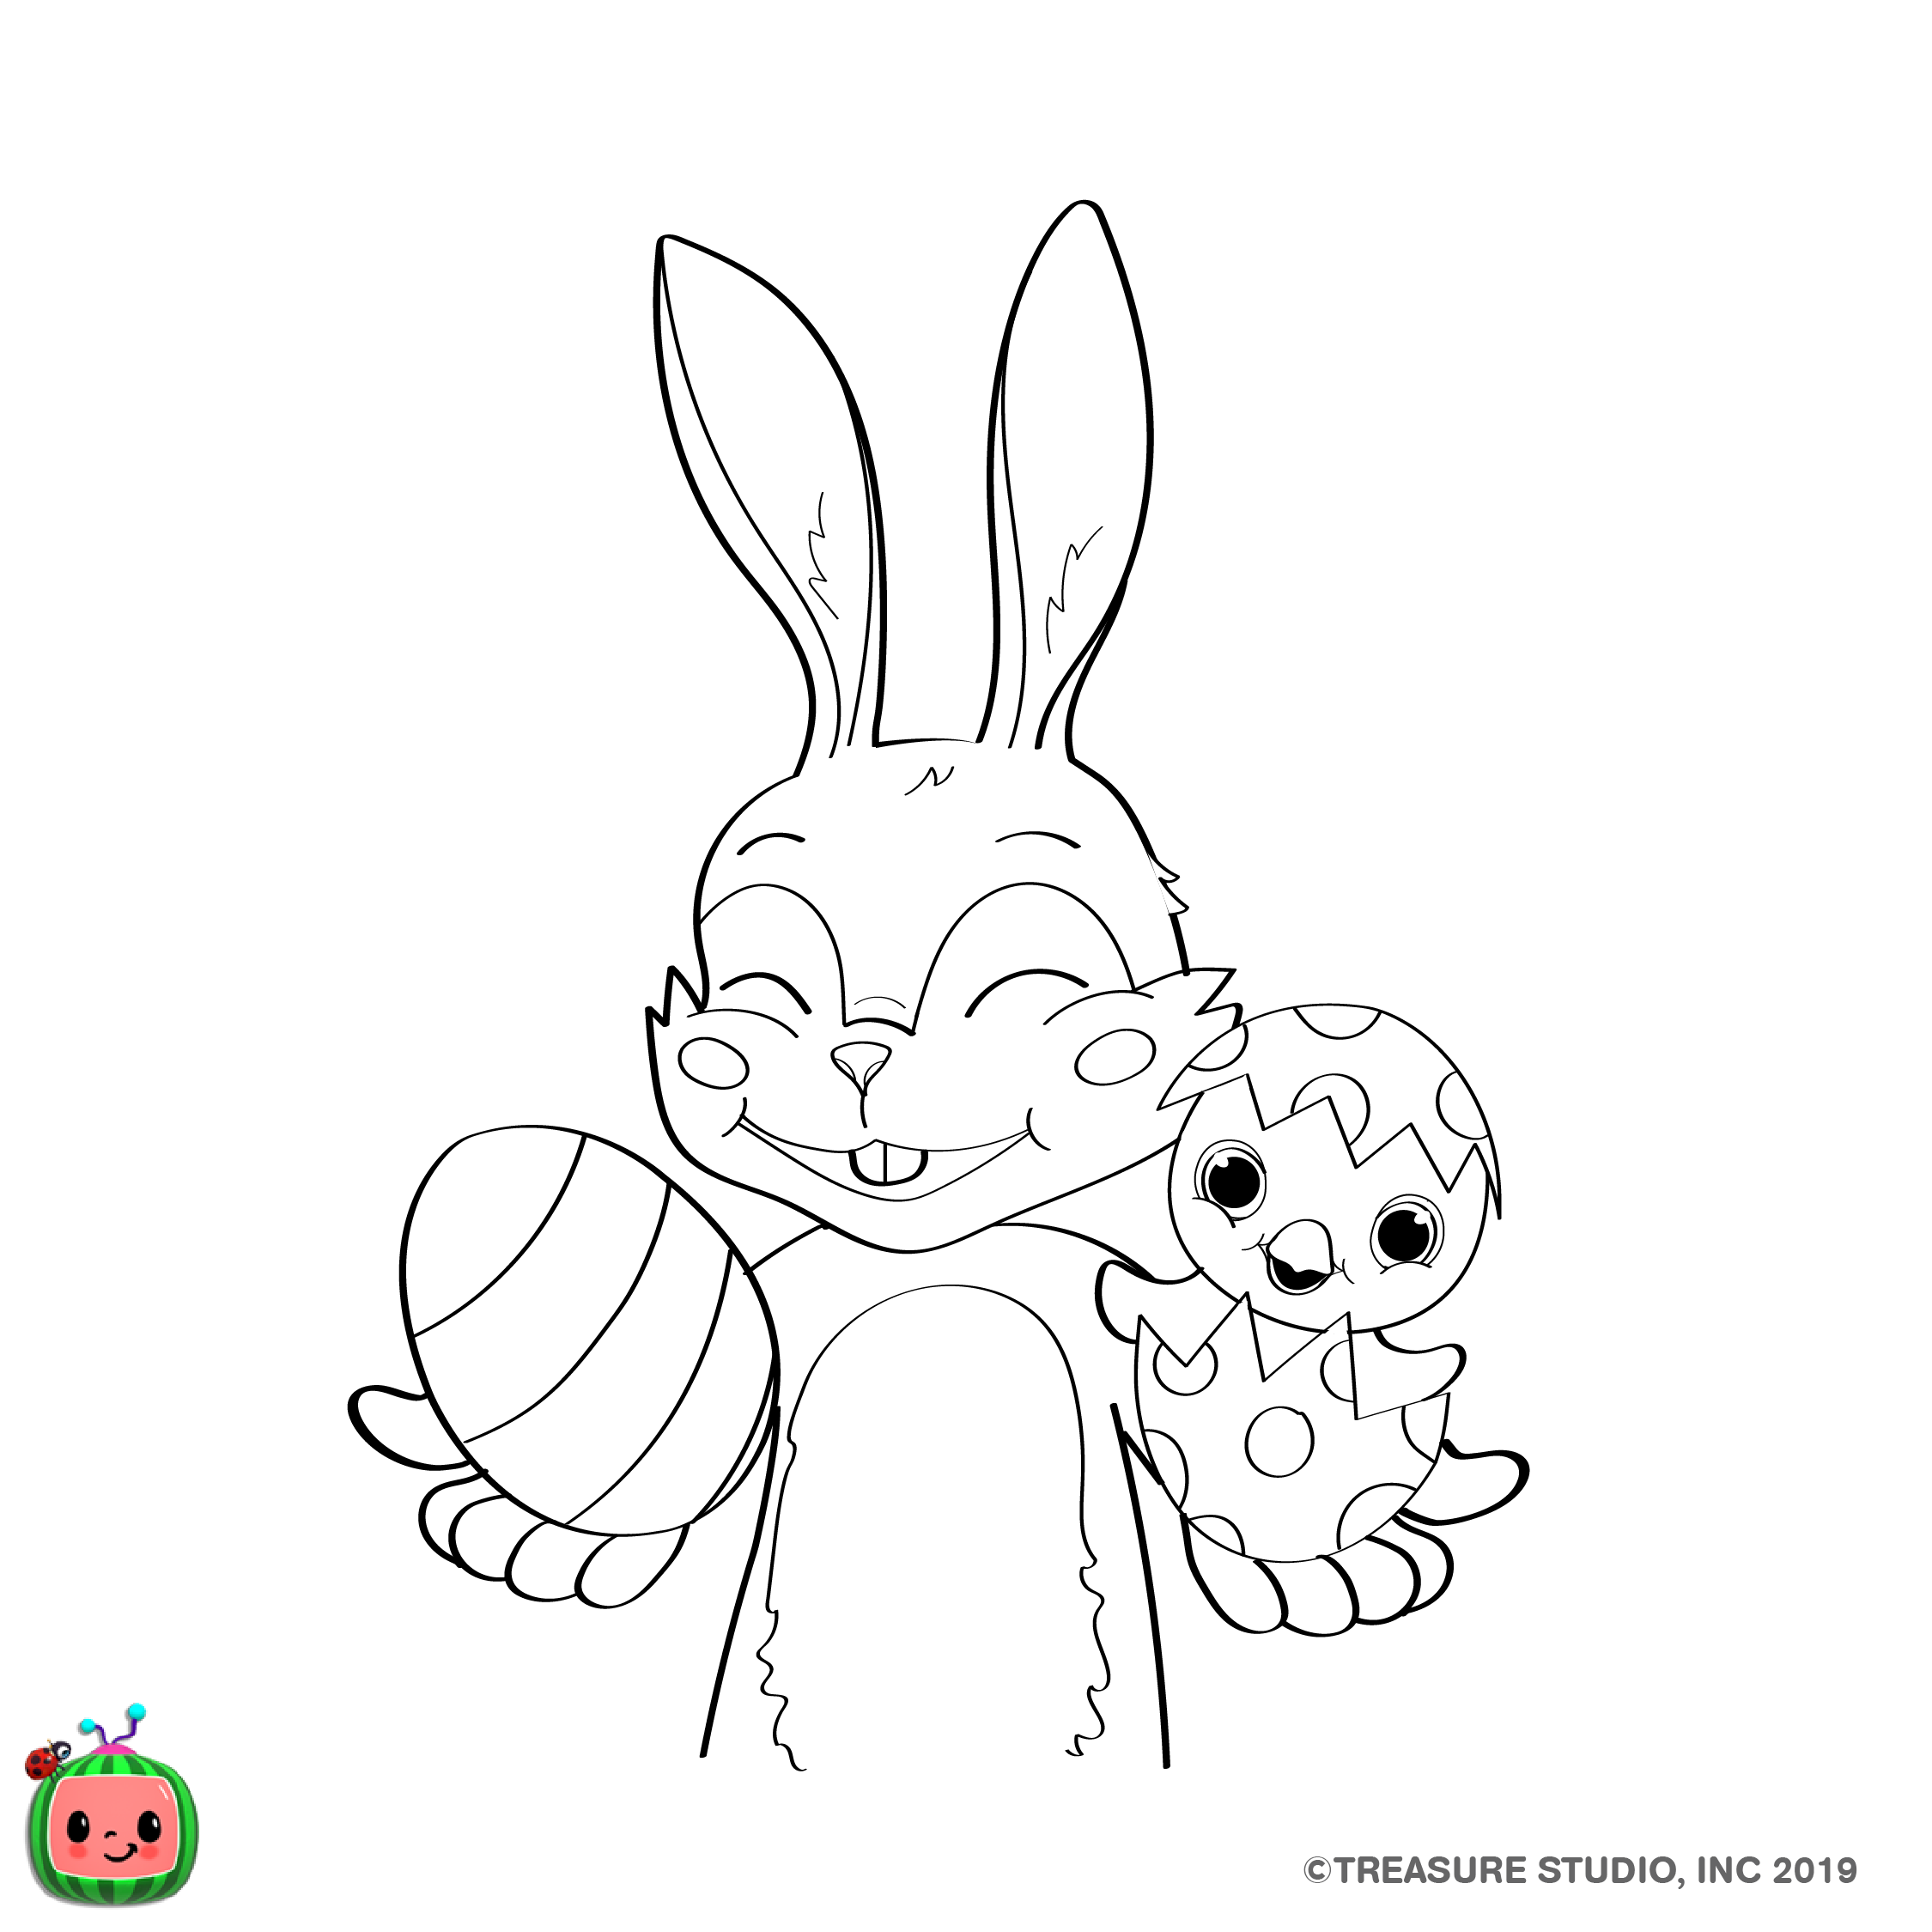 ColoringPage_Easter_IG.png